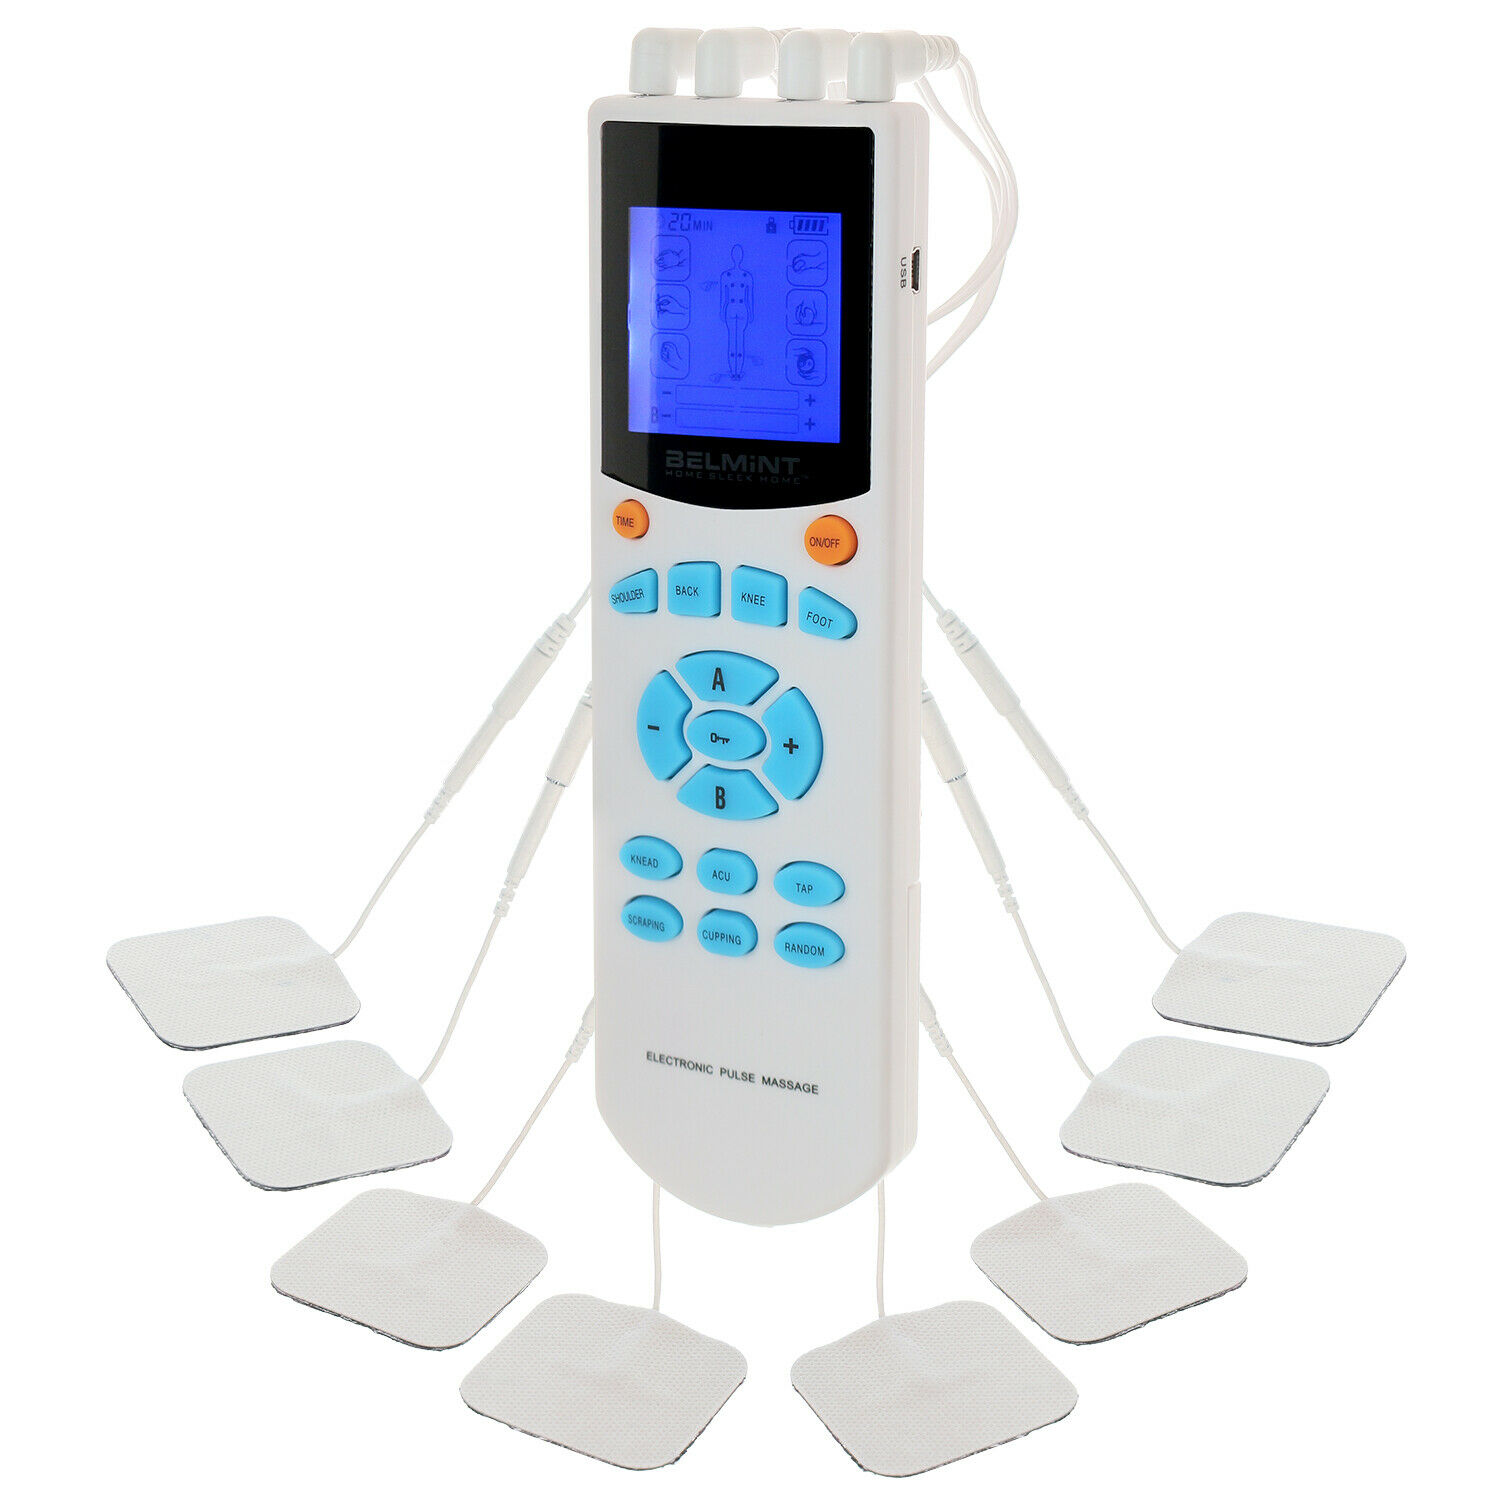 Tens Machine Electrical Stimulation Muscle Therapy Pain Relief.